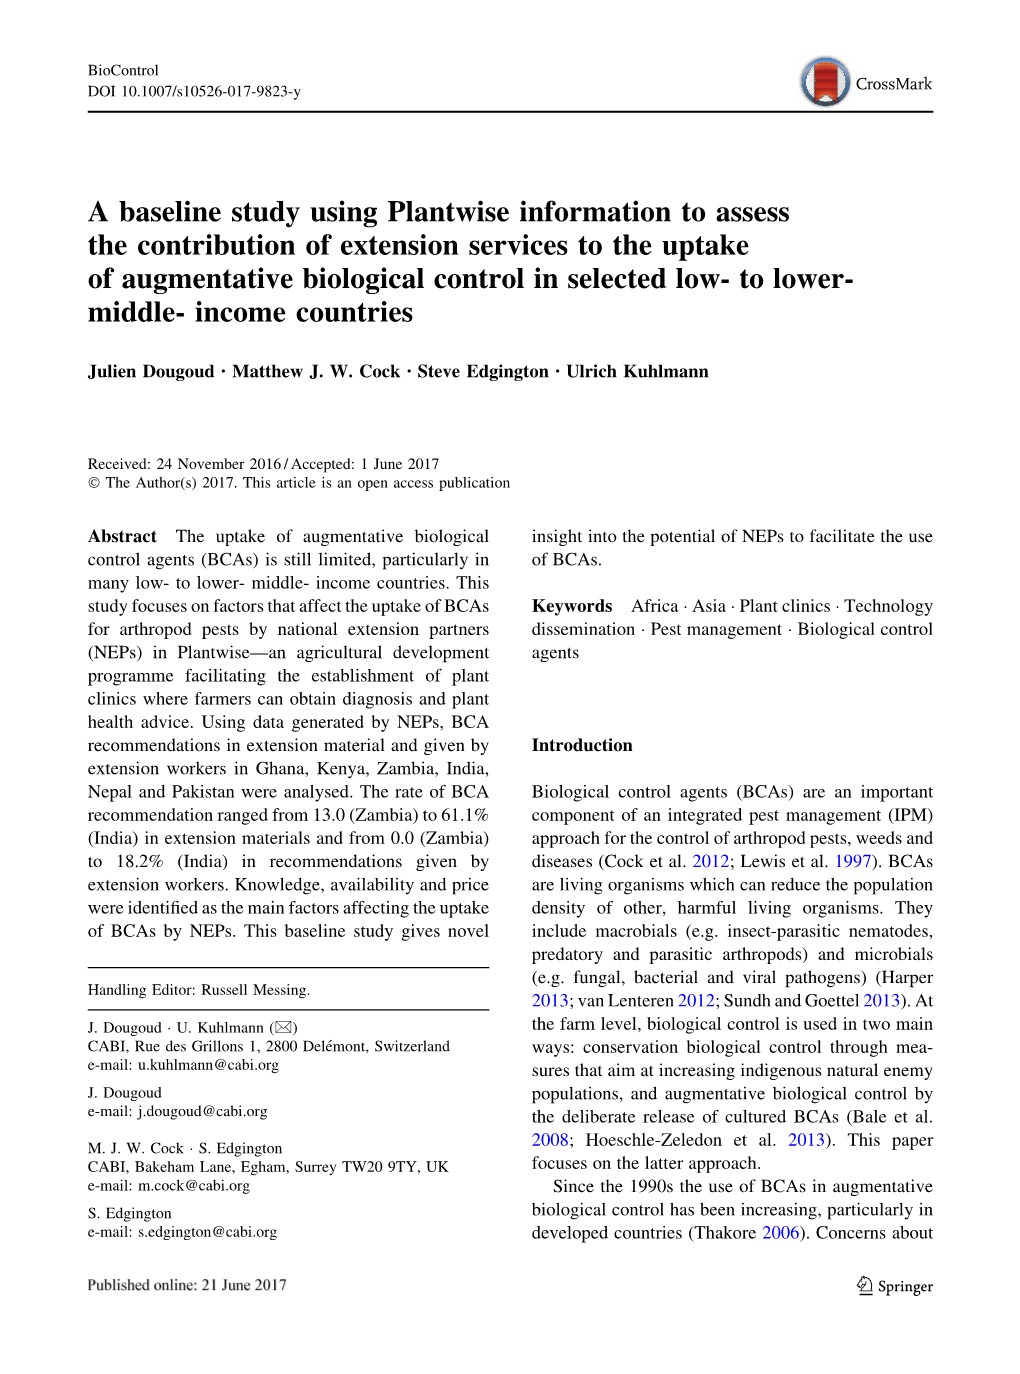 A Baseline Study Using Plantwise Information to Assess the Contribution of Extension Services to the Uptake of Augmentative Biol